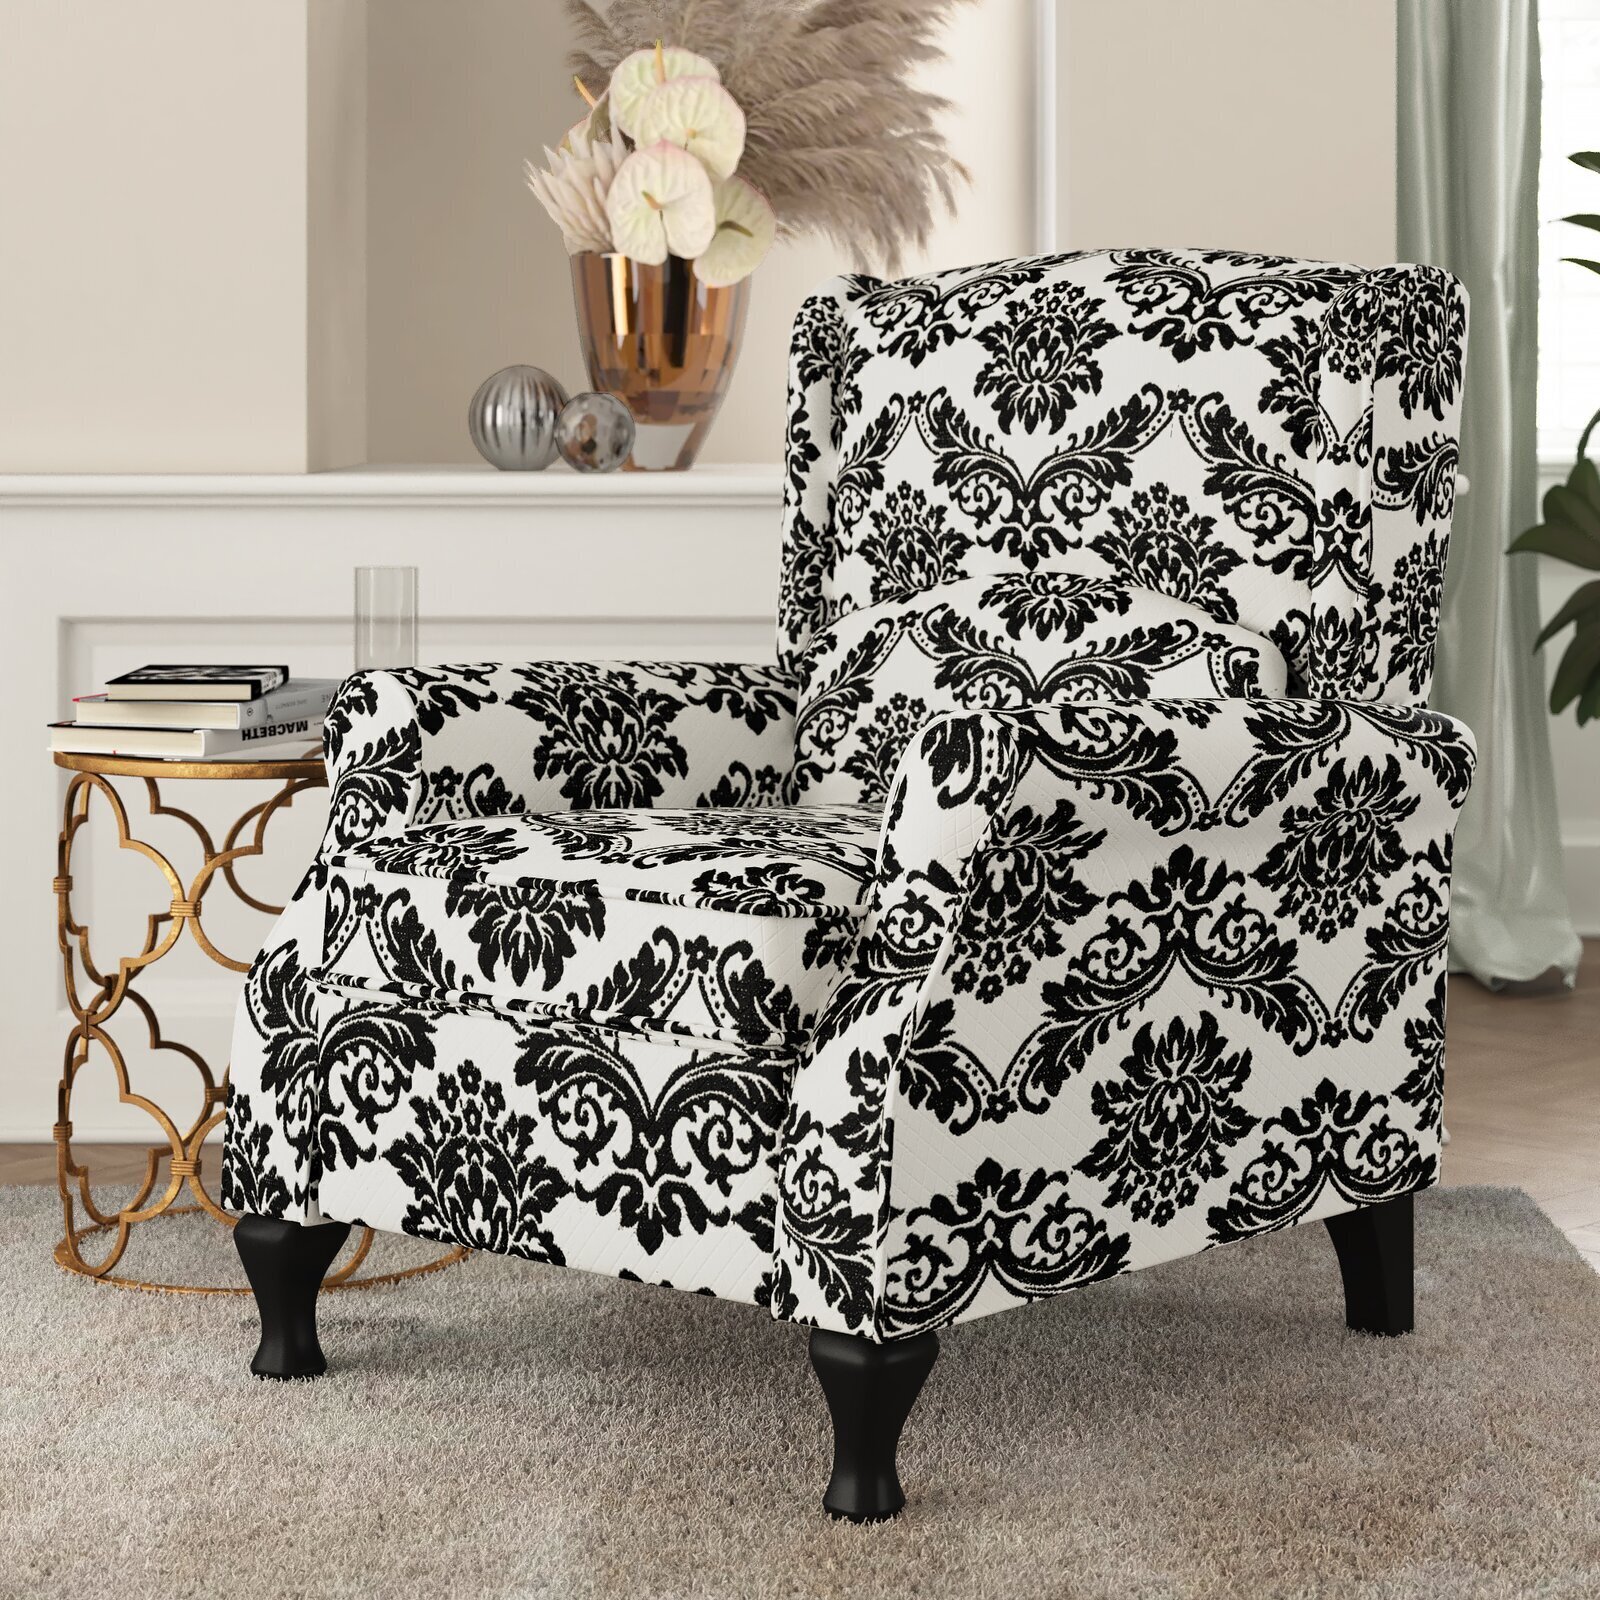 Black and White Queen Anne Recliner Chair 